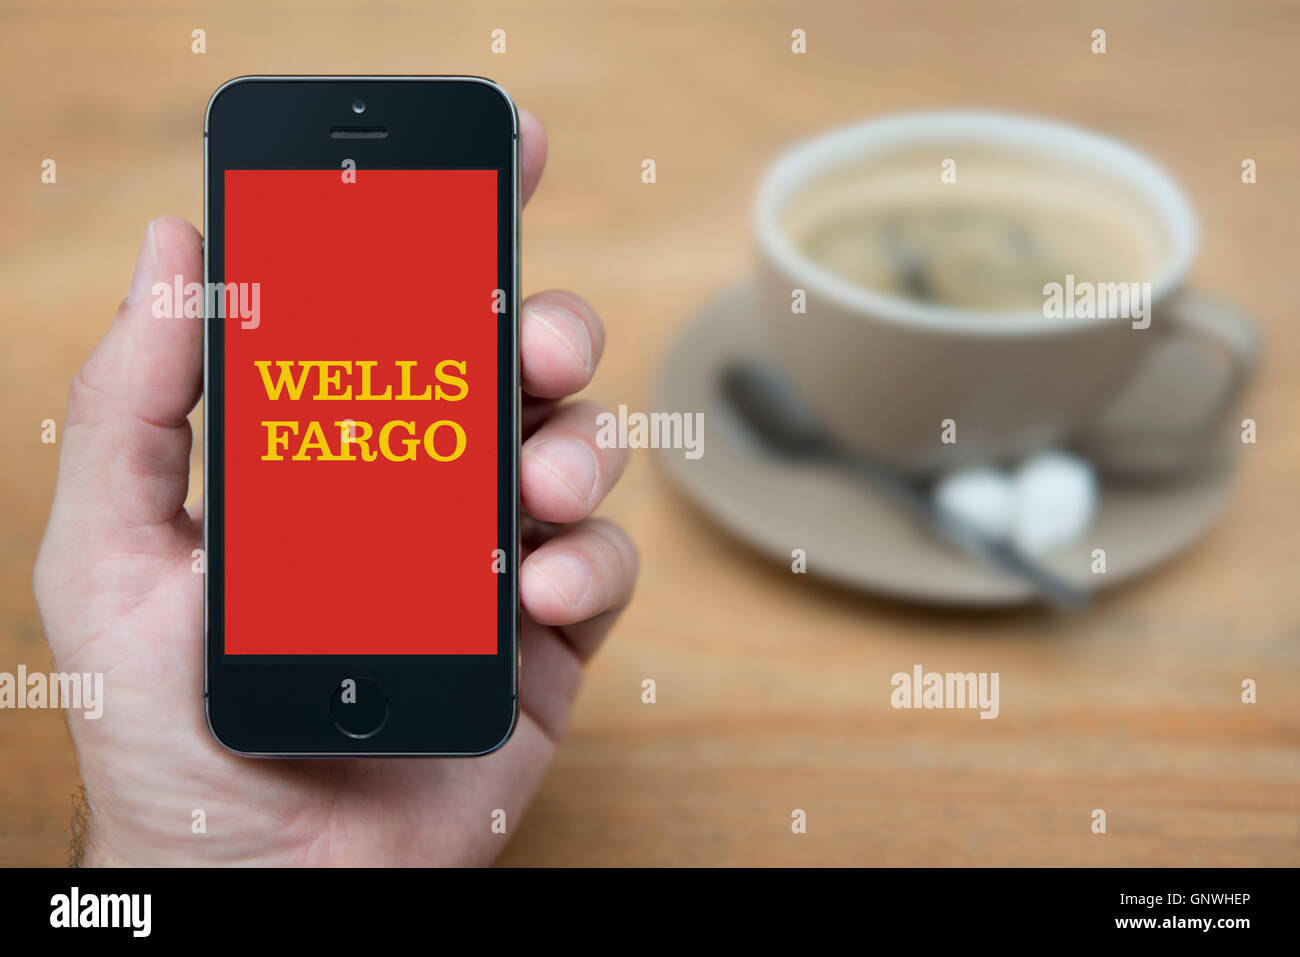 A man looks at his iPhone which displays the Wells Fargo bank logo, while sat with a cup of coffee (Editorial use only). Stock Photo